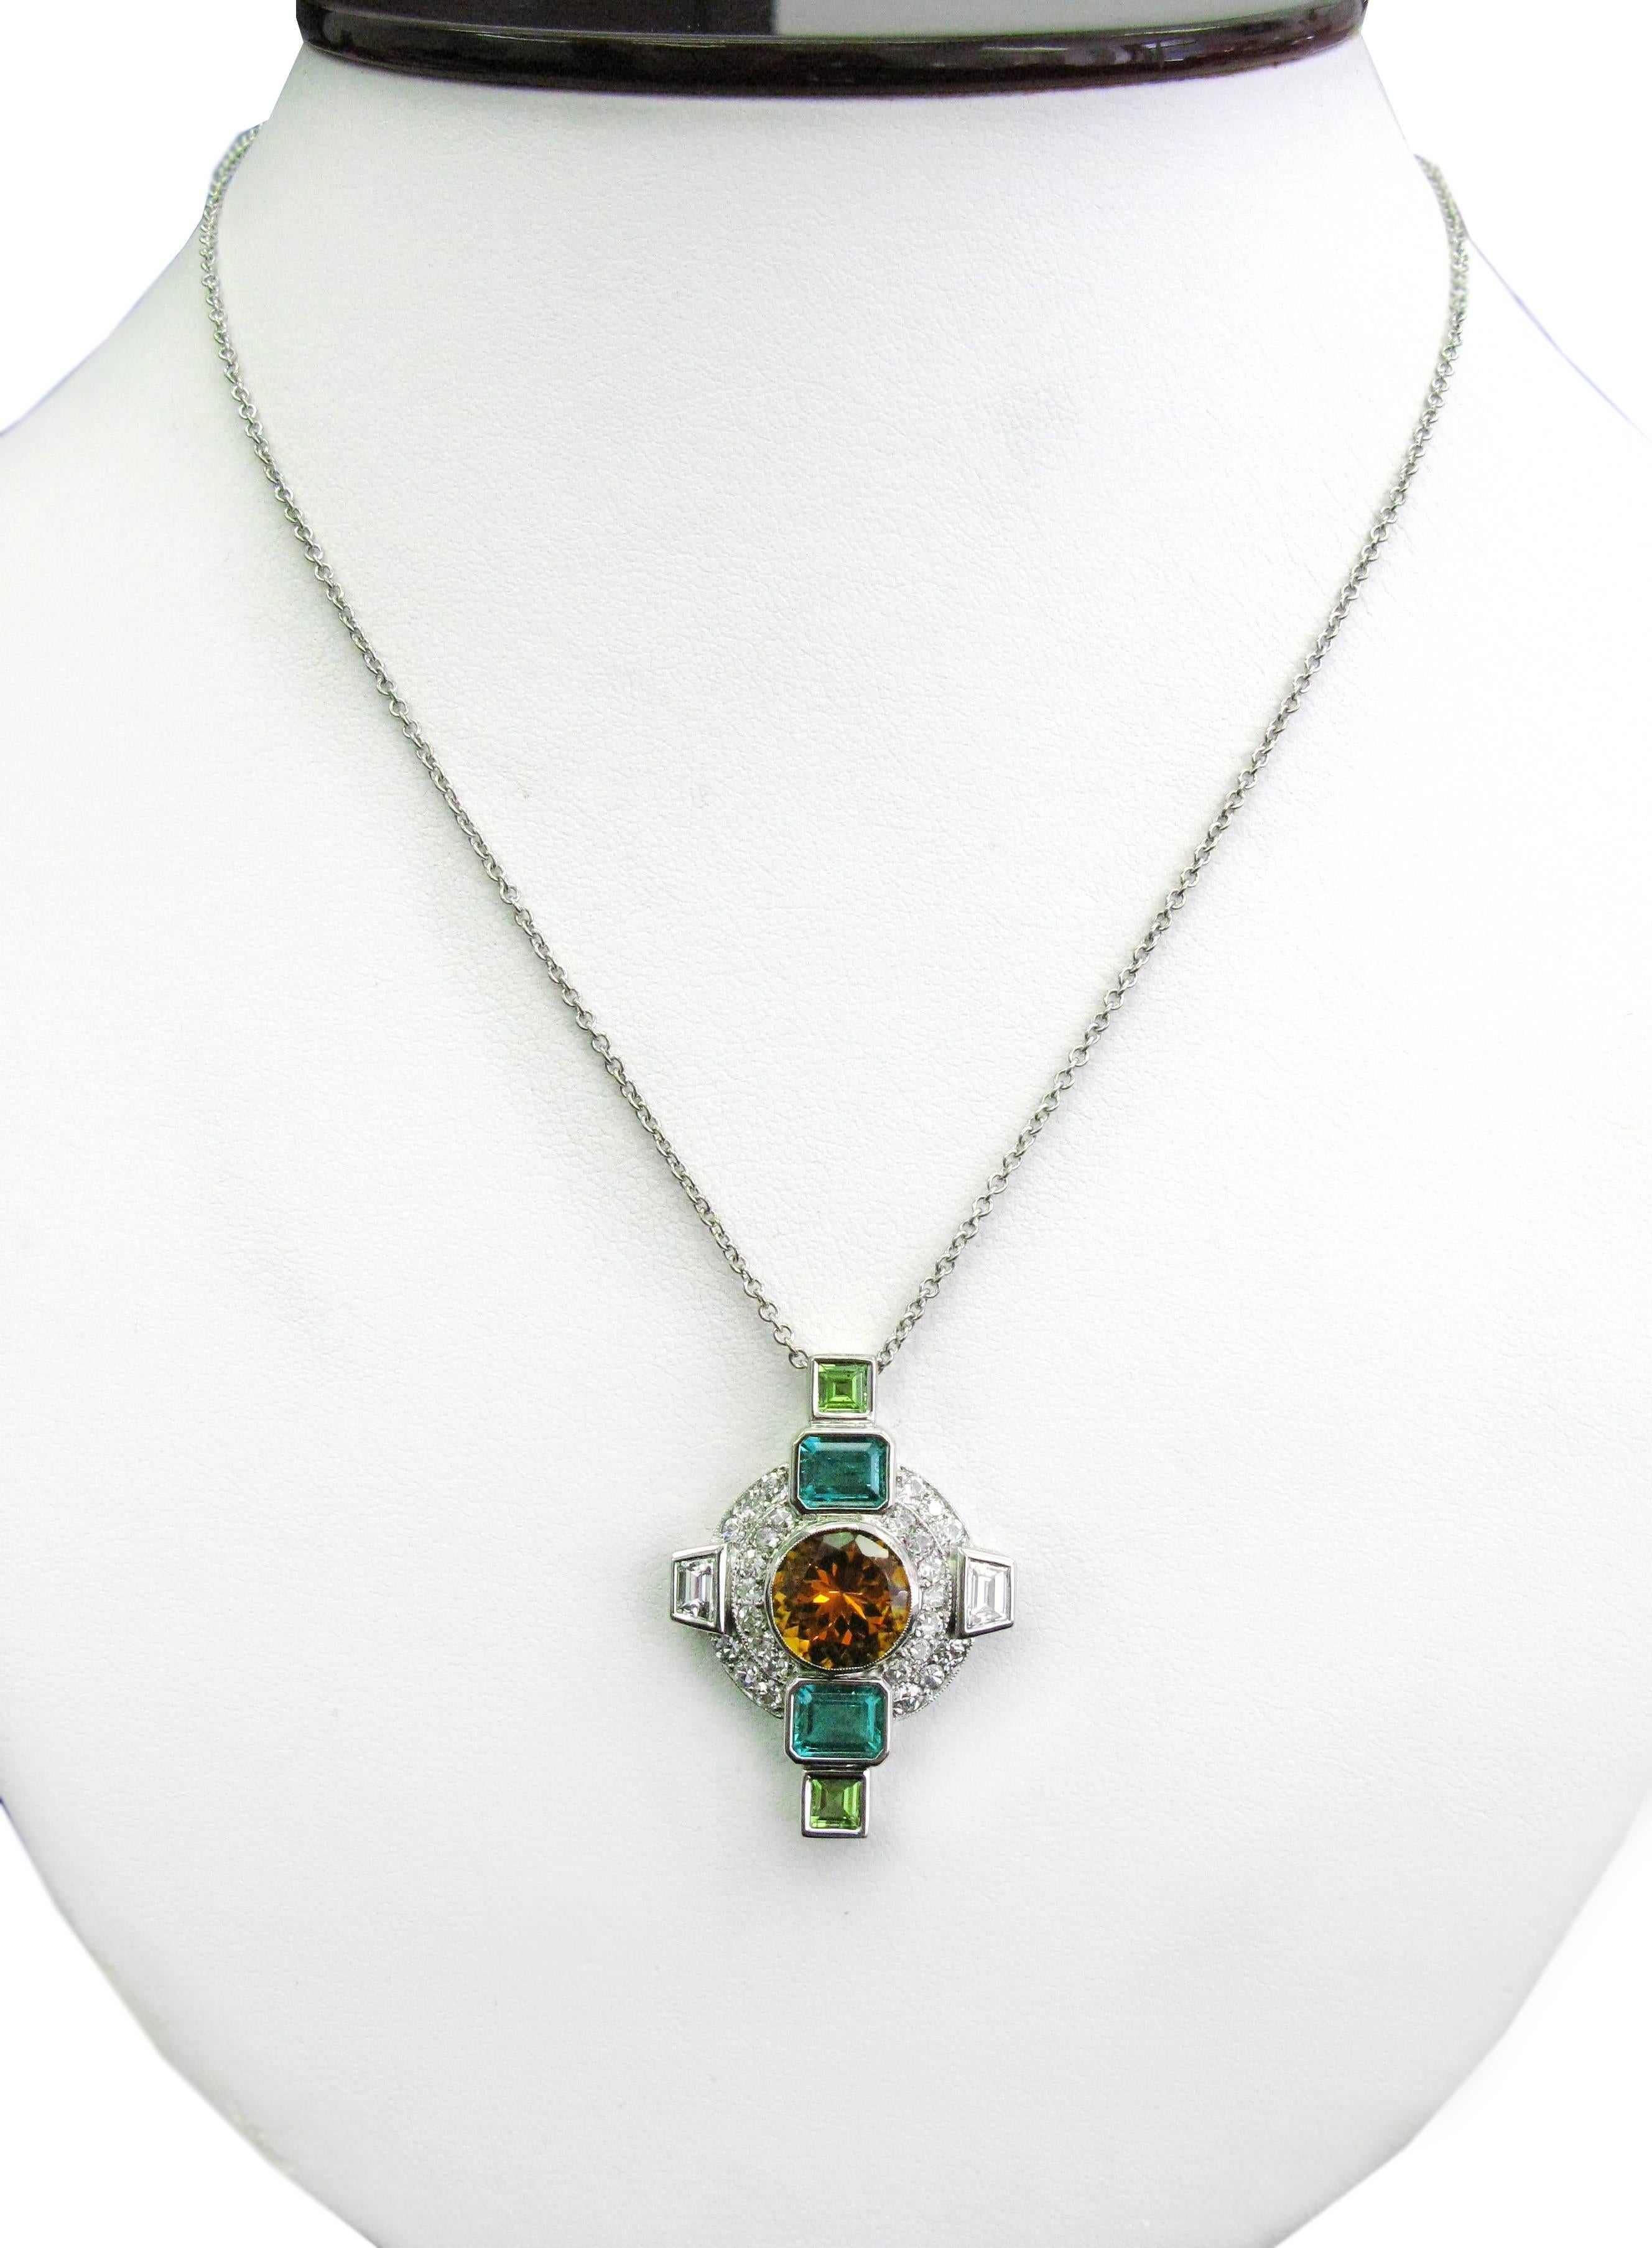 This stunning one-of-a-kind 18kt white gold cross pendant features a bezel set 3.53ct round brilliant citrine center stone with two bezel set step cut emeralds totaling 2cts and two asscher cut peridots totaling 1ct. The piece is completed with 13